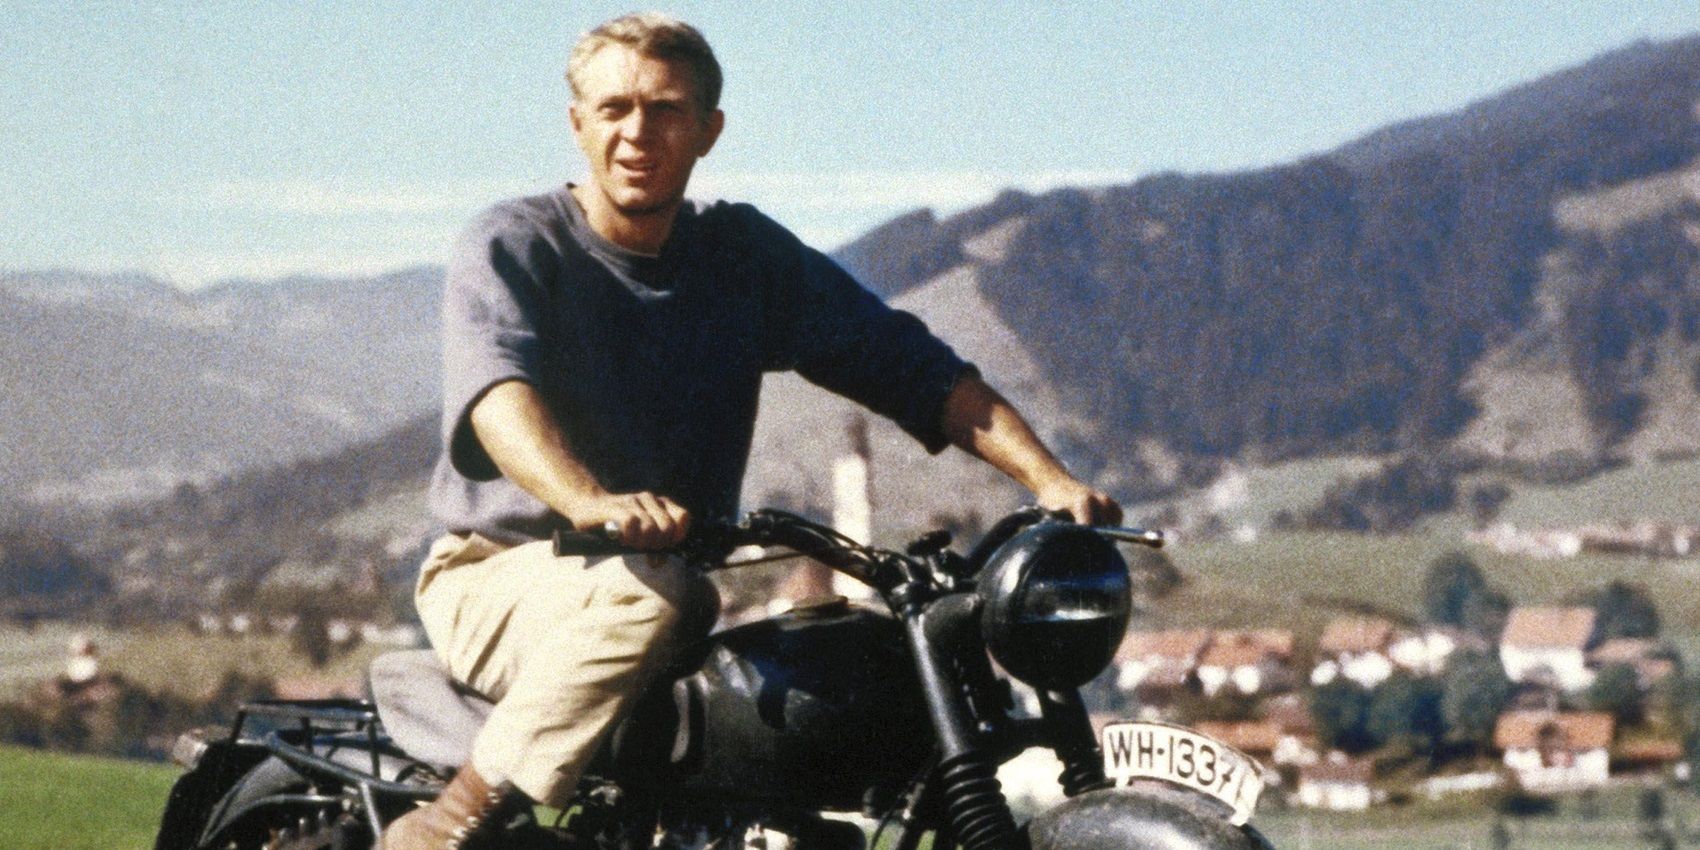 Captain Virgil Hilts on a motorcycle in The Great Escape.